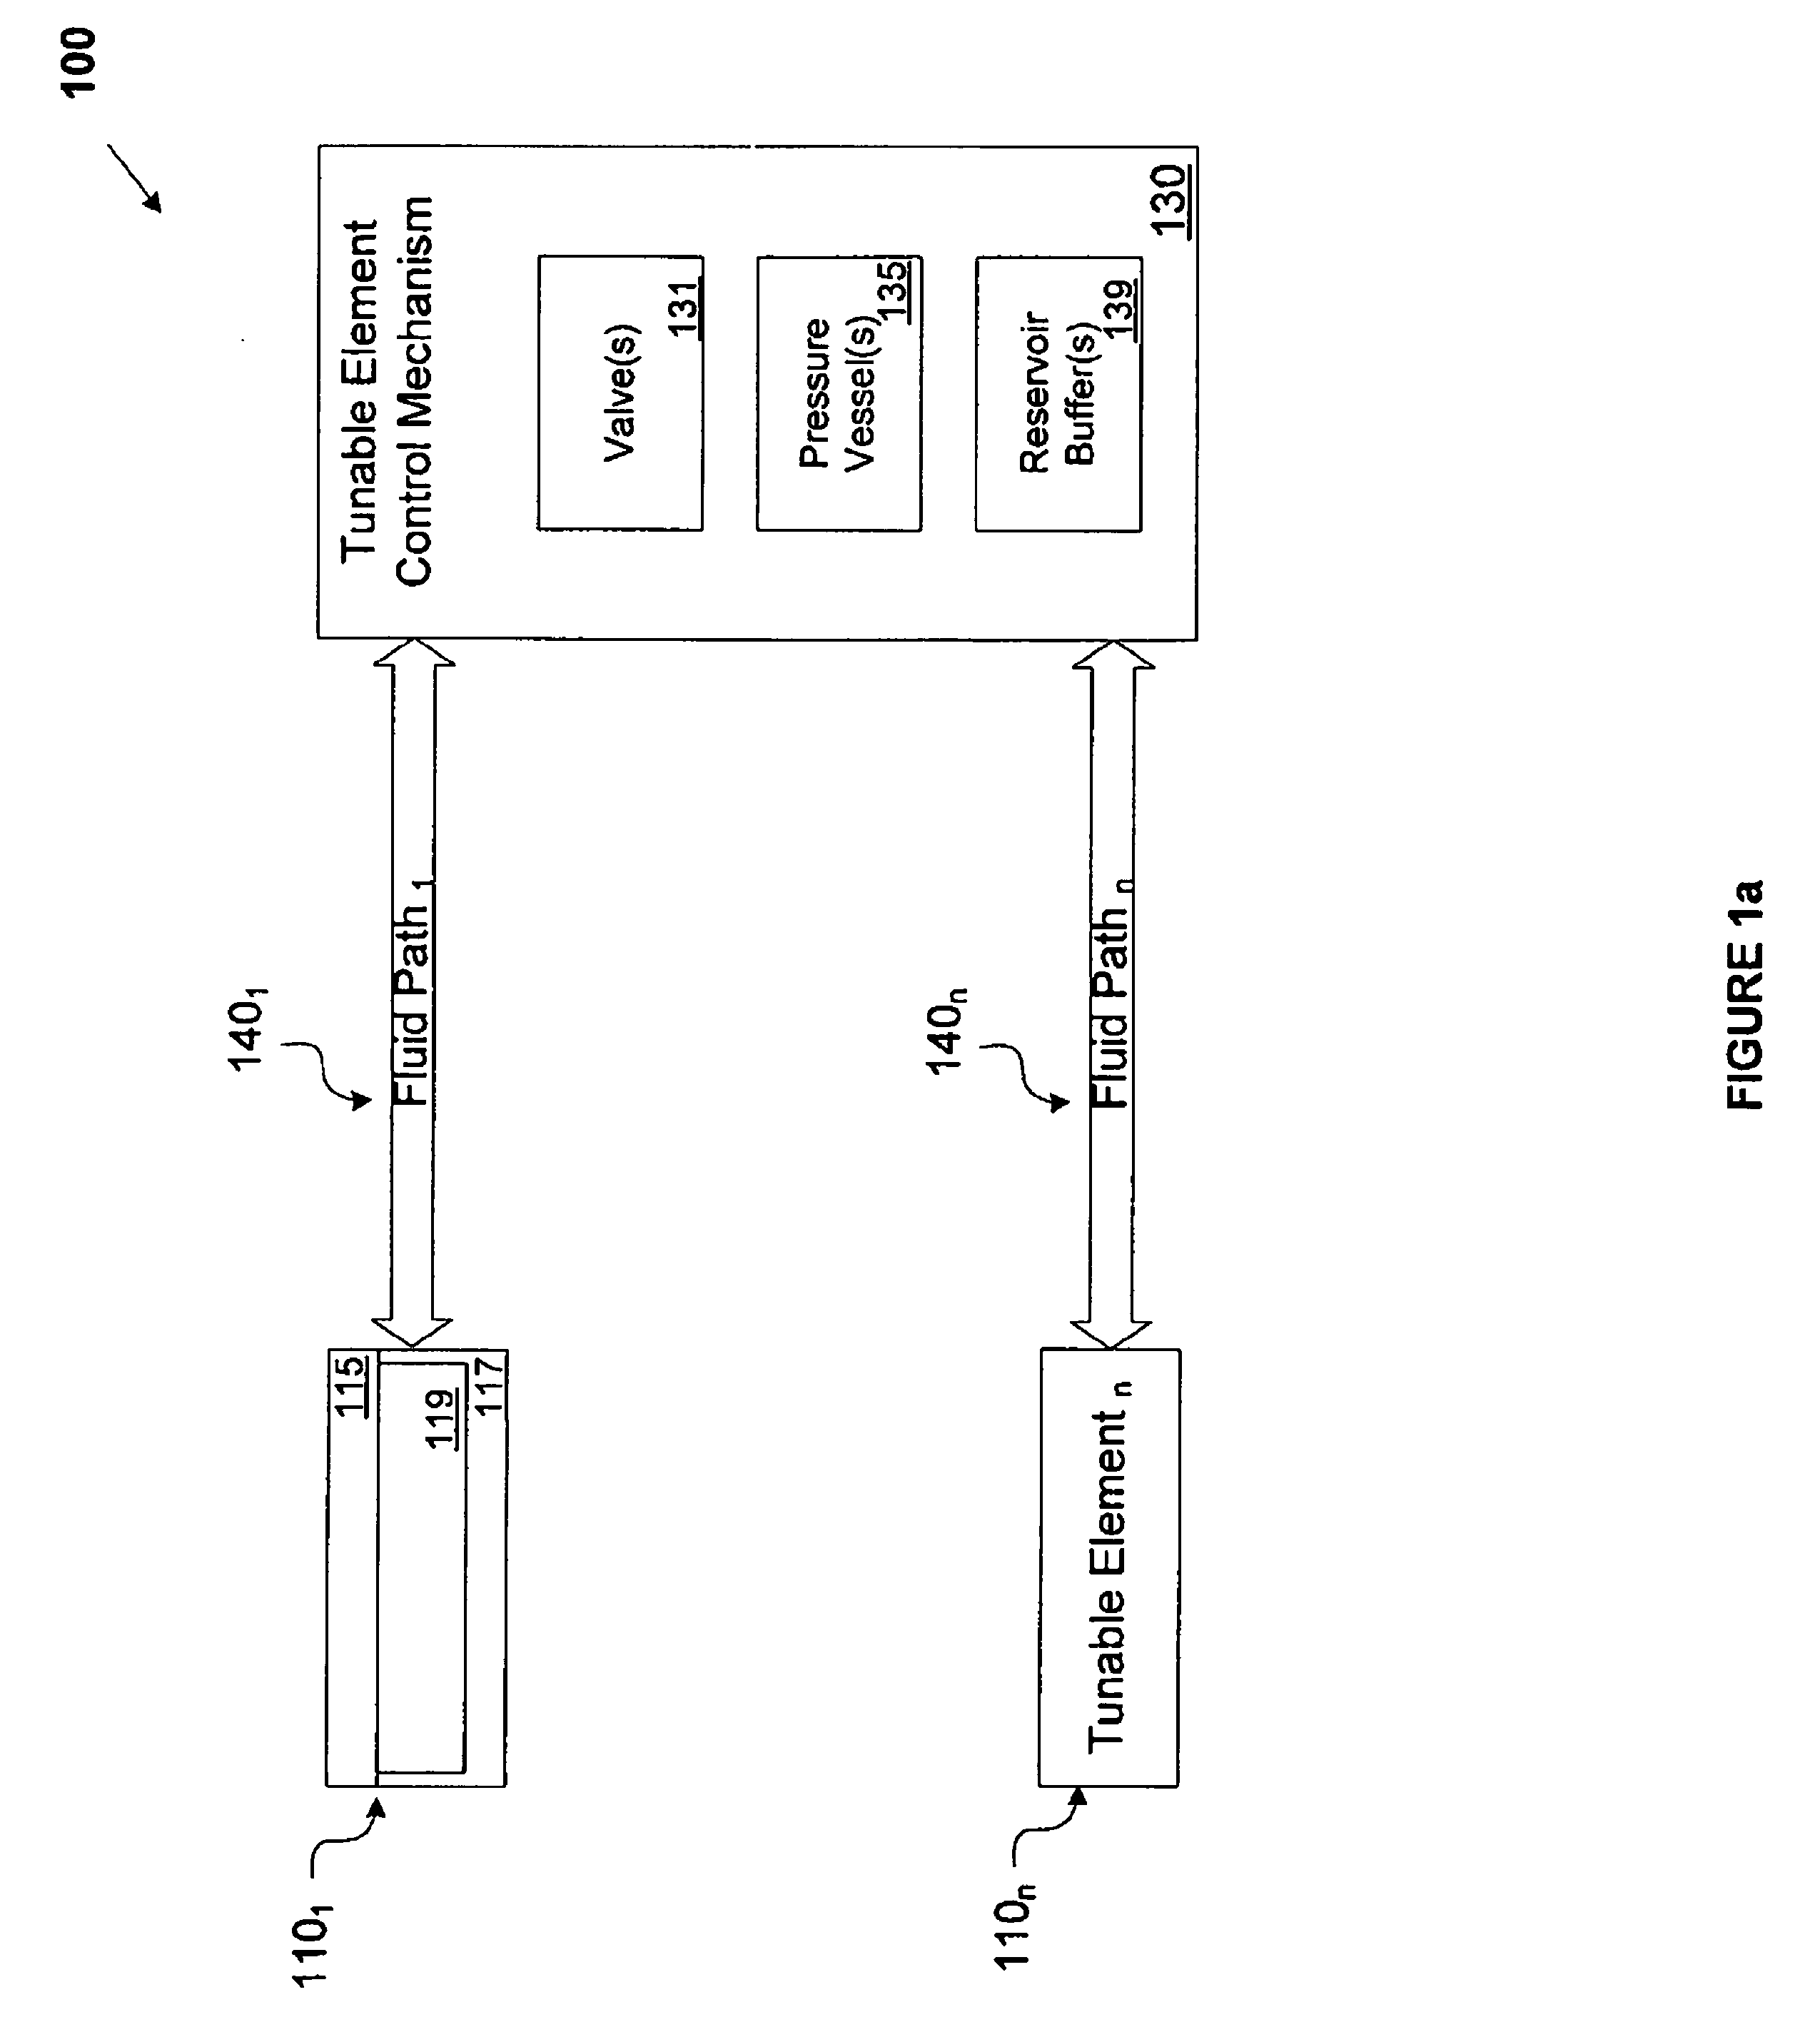 Systems and methods for effecting zoom and focus using fluidic adaptive lenses